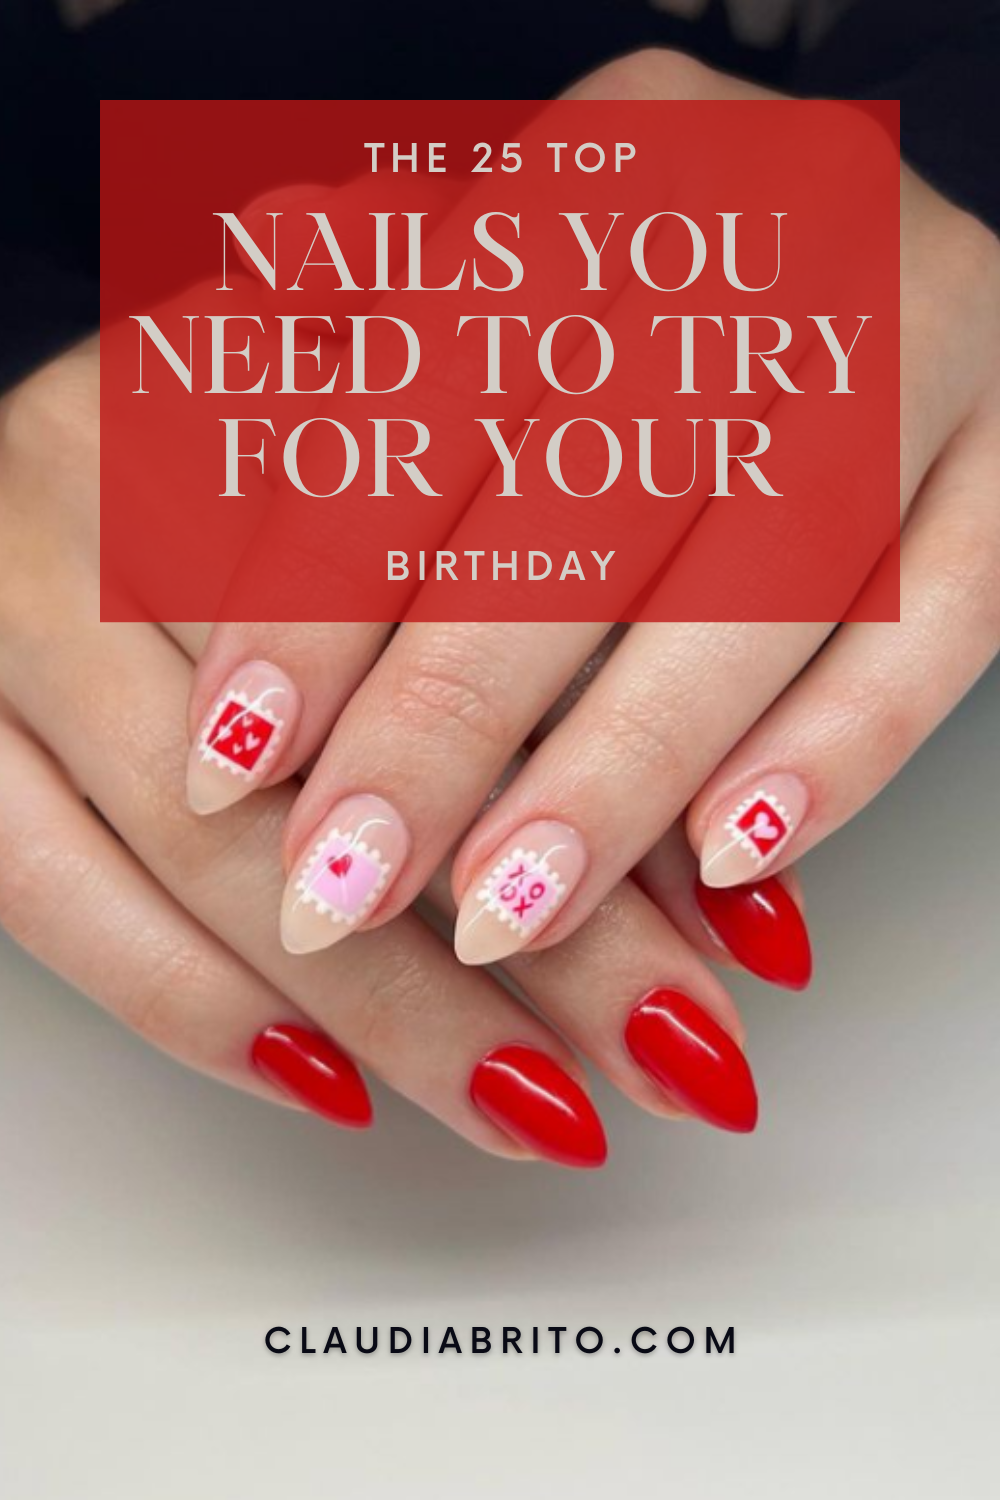 25 Nail Ideas You Need To Try For Your Birthday